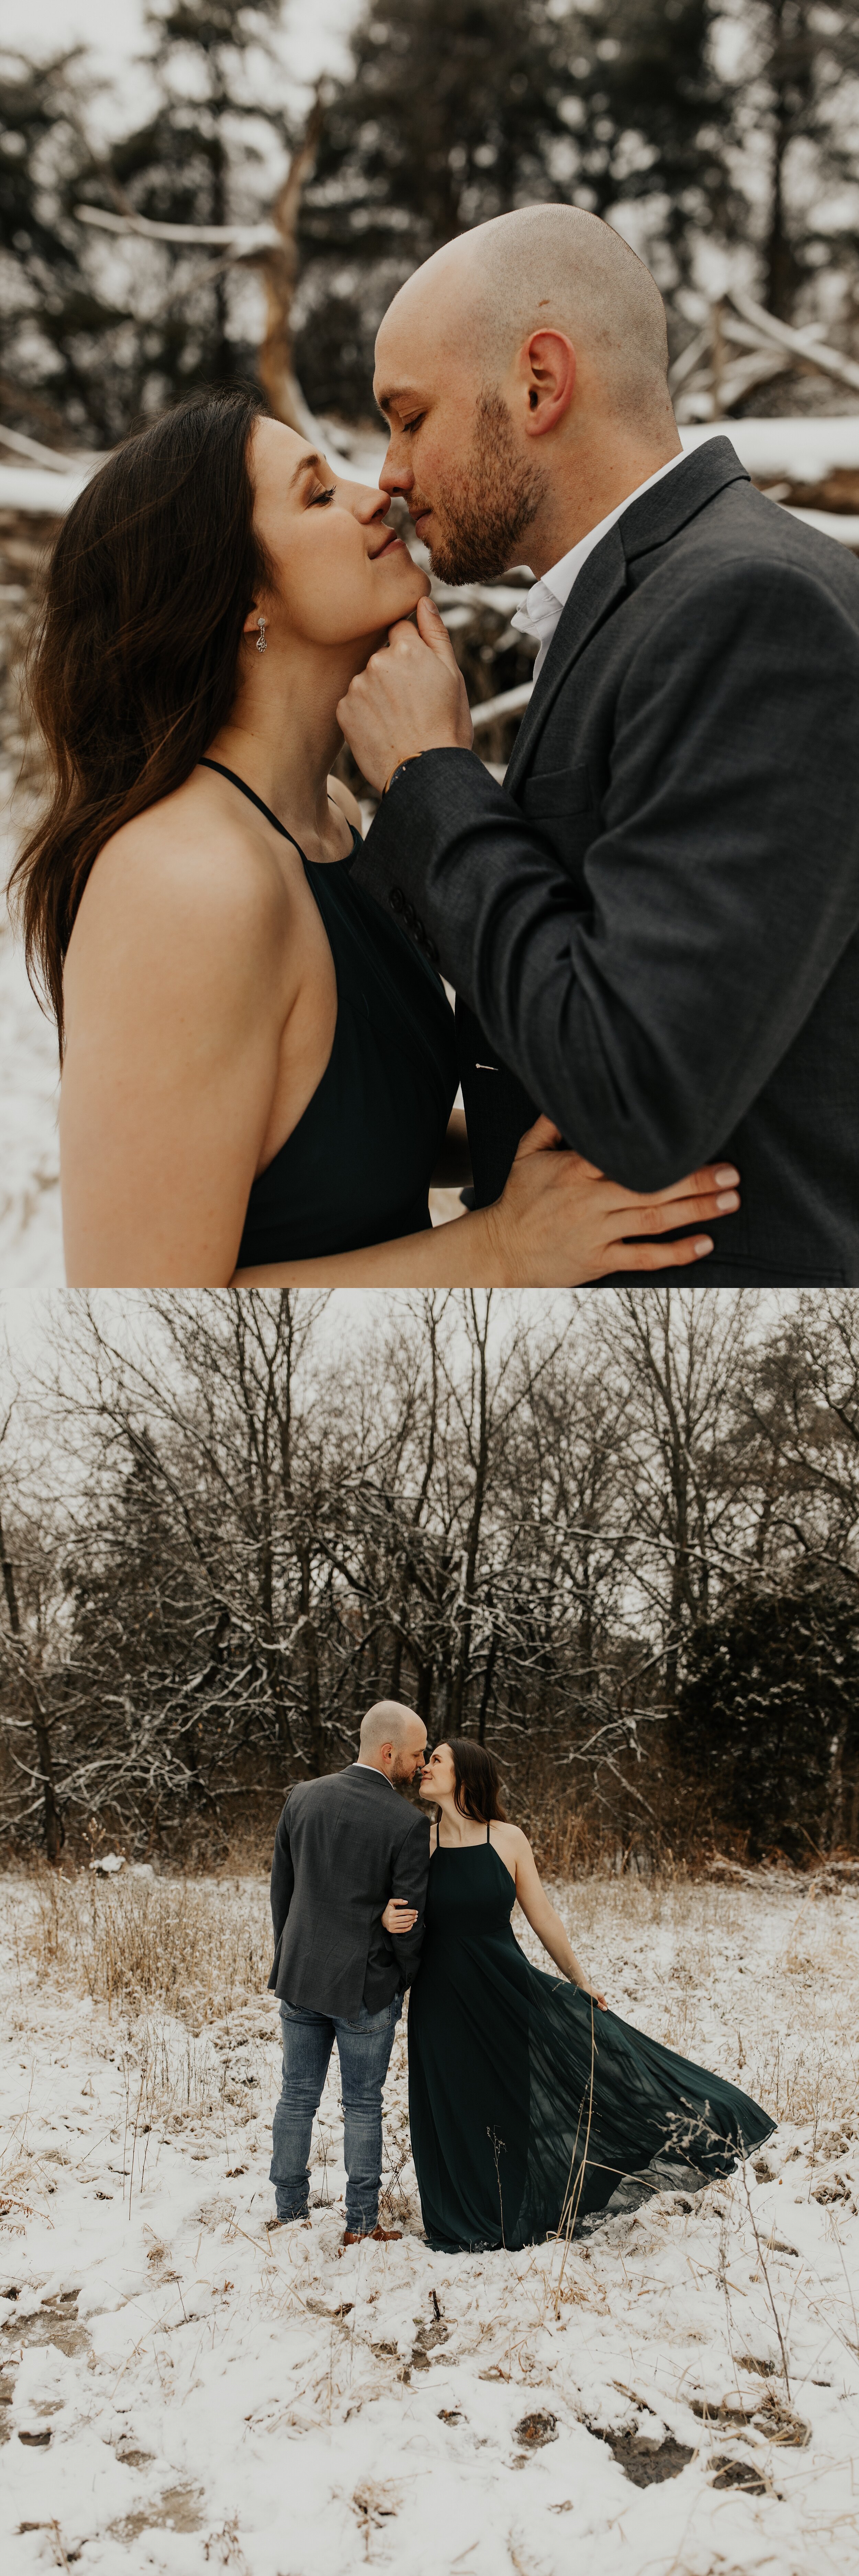 jessika-christine-photography-outdoor-engagement-couples-snow-adventurous-session (5).jpg